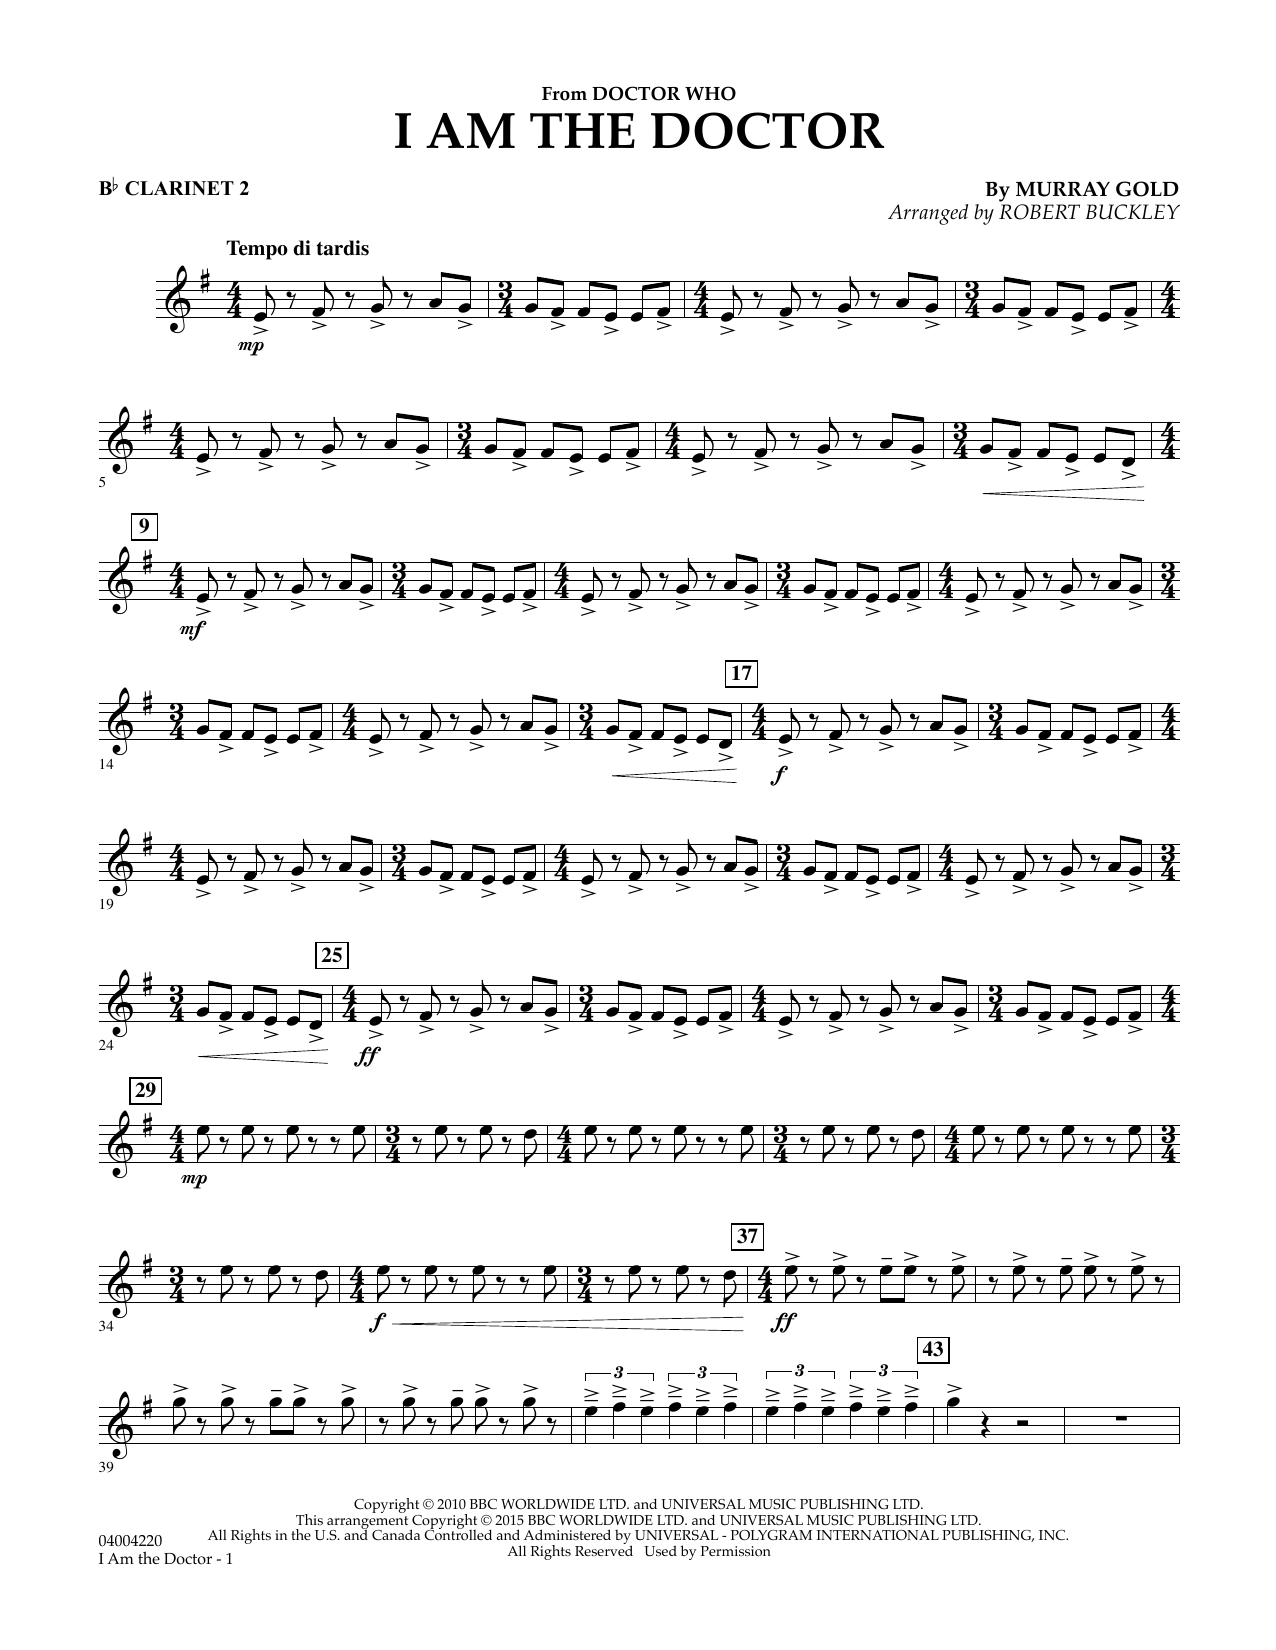 Robert Buckley I Am the Doctor (from Doctor Who) - Bb Clarinet 2 sheet music notes and chords. Download Printable PDF.